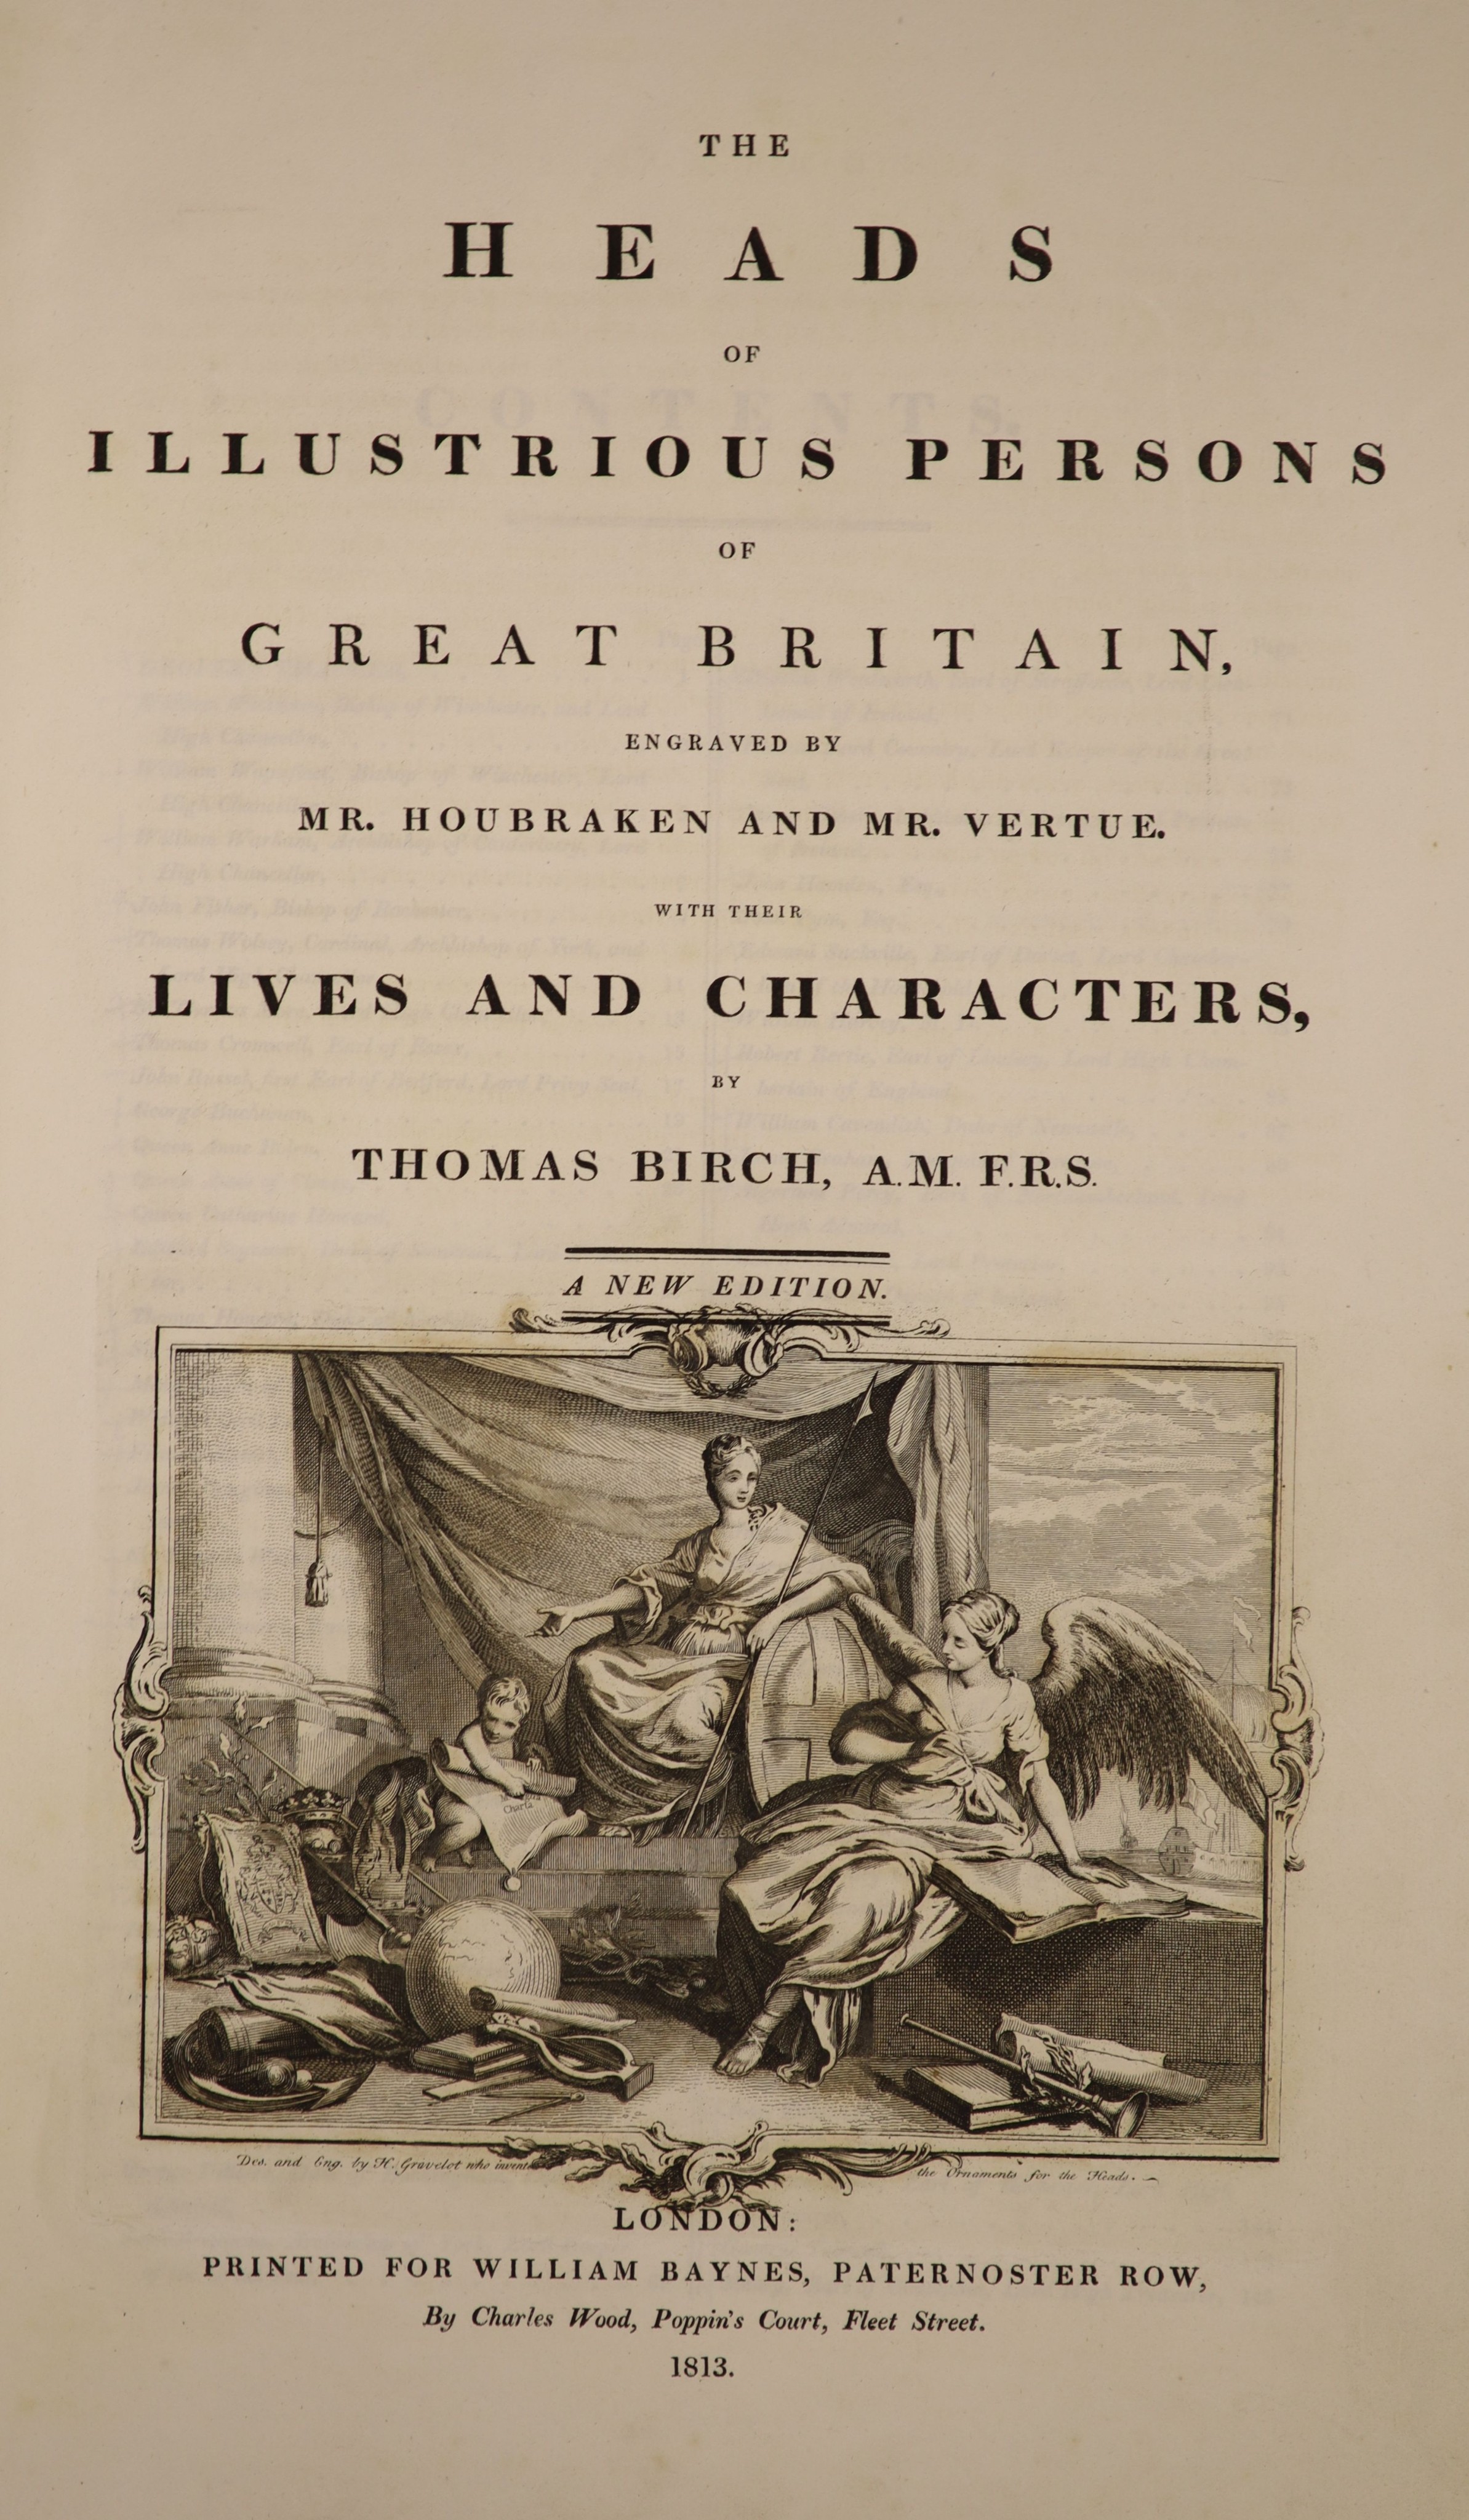 Birch, Thomas - The Heads of Illustrious Persons of Great Britain, engraved by Mr Houbraken and Mr Vertue, With their Lives and Characters ..., new edition, 107 (ex 108) copper engraved plates; contemp. black straight-gr